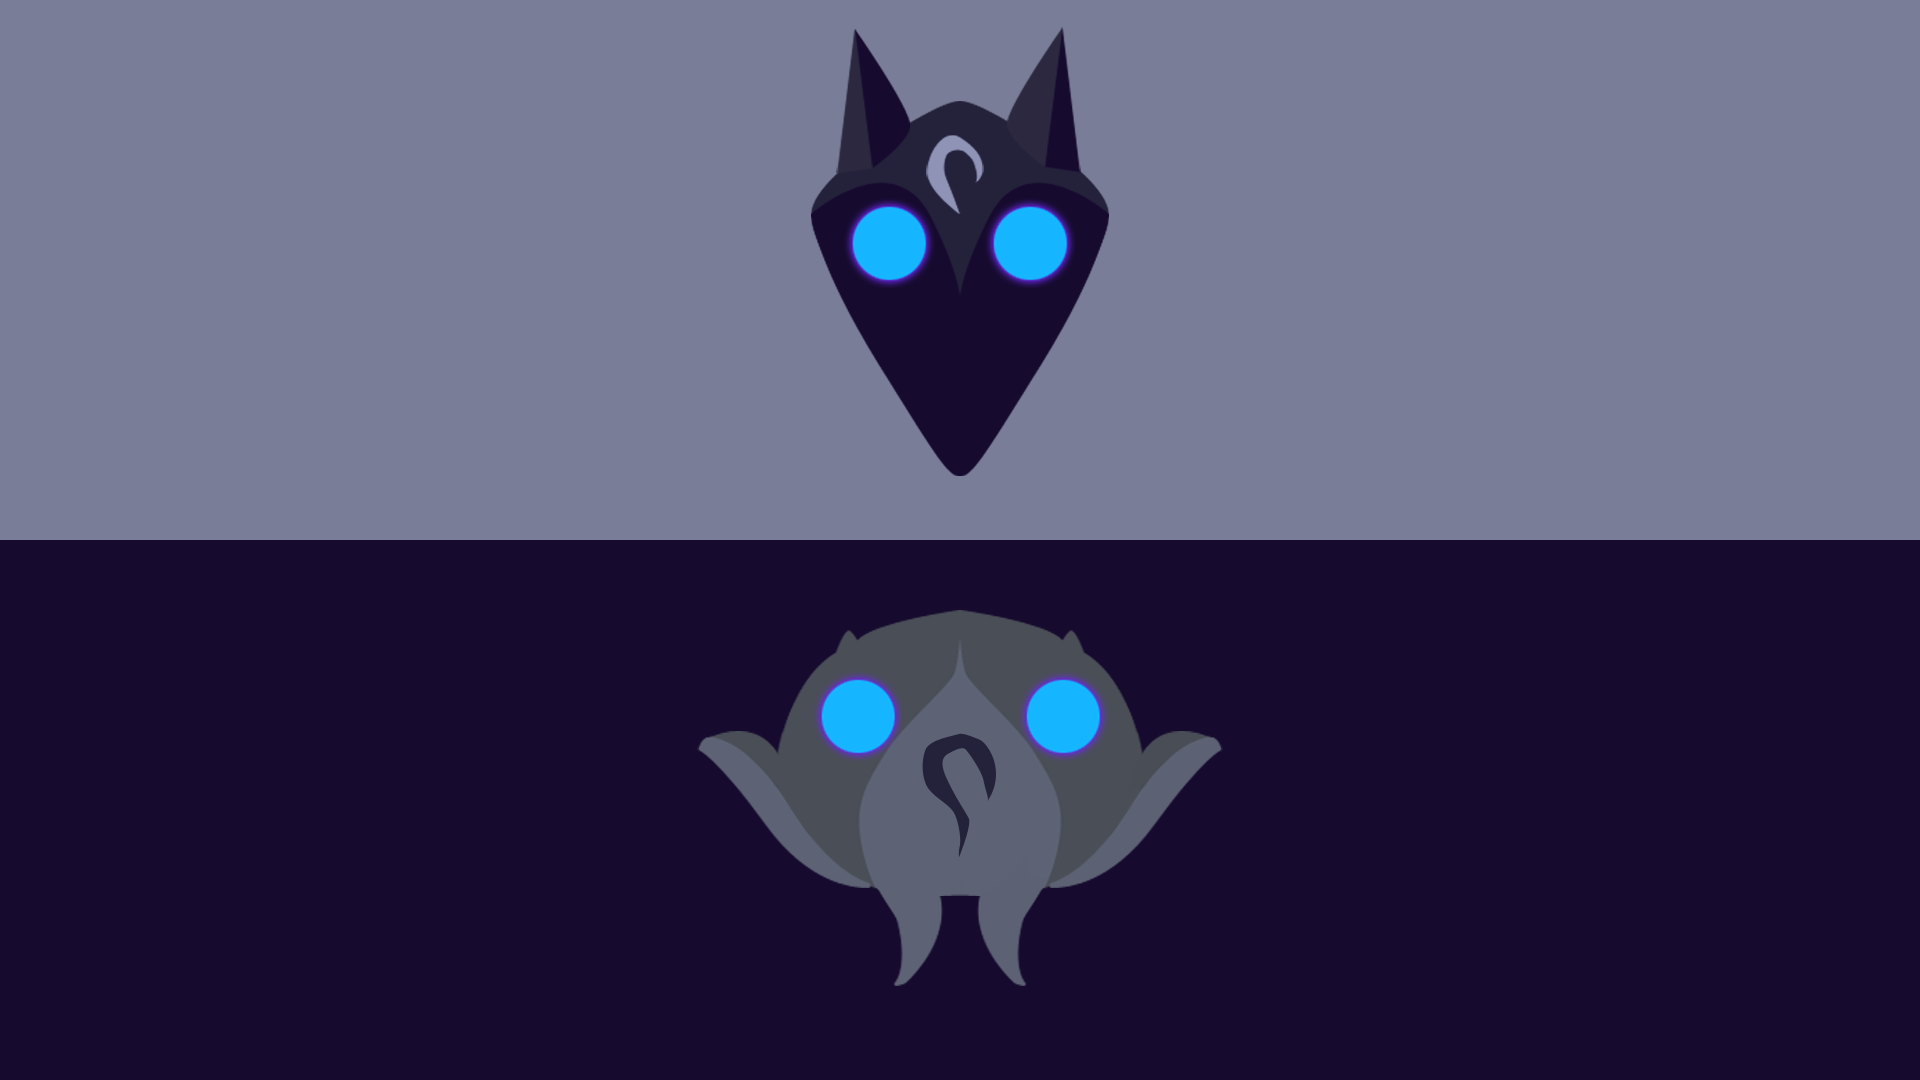 Made a Kindred Minimalist Wallpaper